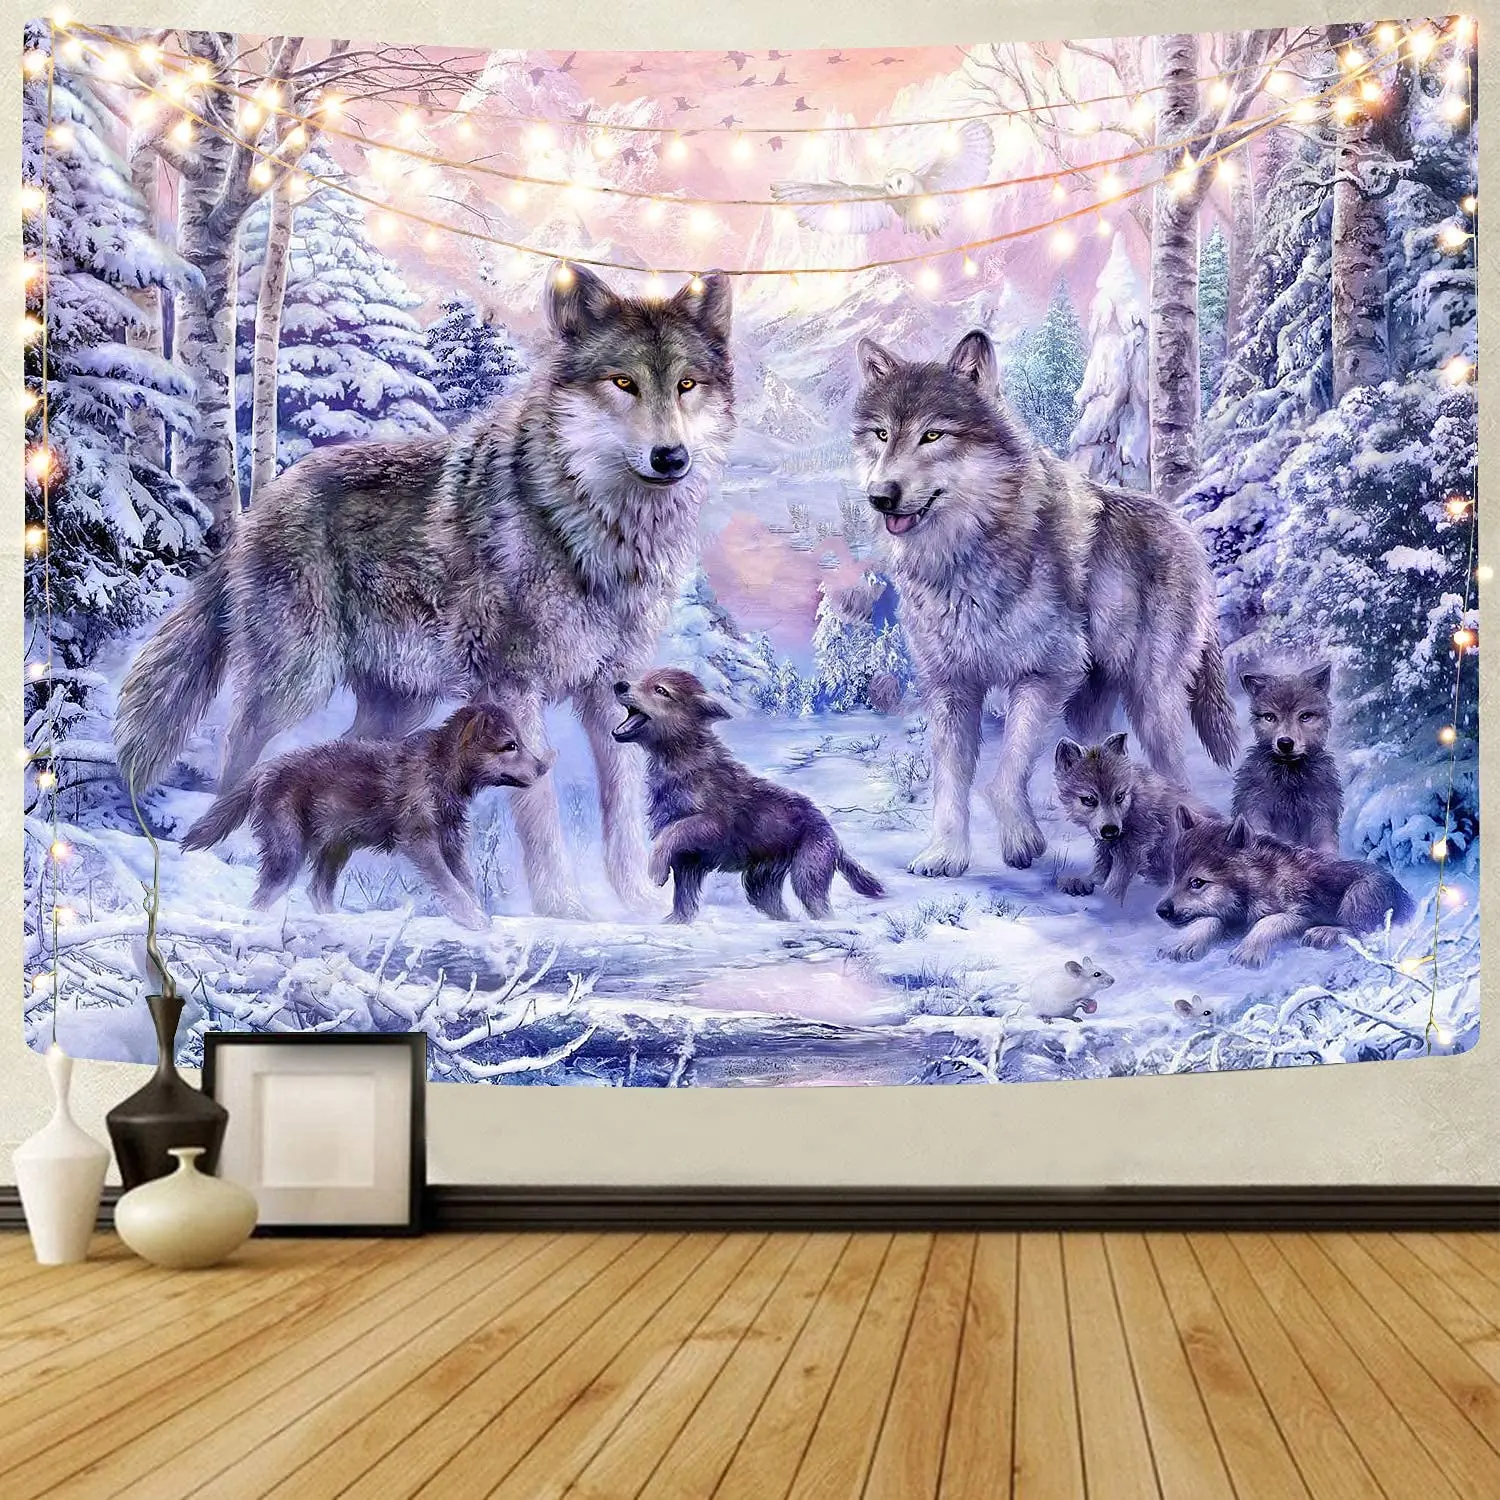 

Snow Wolf Tapestry Pink Family Wolves Tapestry Wall Hanging Wildlife Animals Tapestries for Bedroom Living Room Dorm Decorations